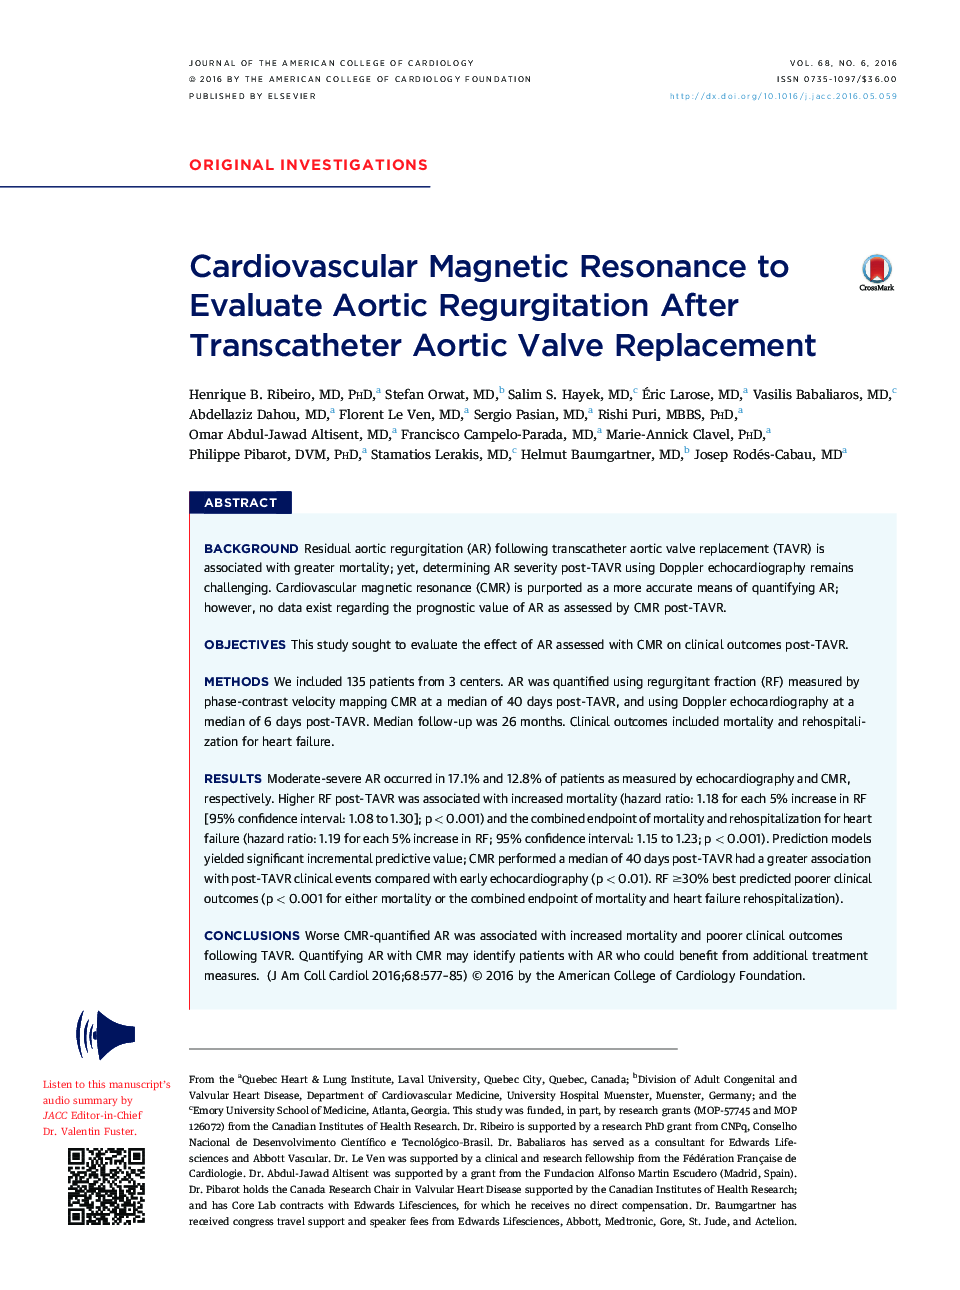 Cardiovascular Magnetic Resonance to Evaluate Aortic Regurgitation After Transcatheter Aortic Valve Replacement 